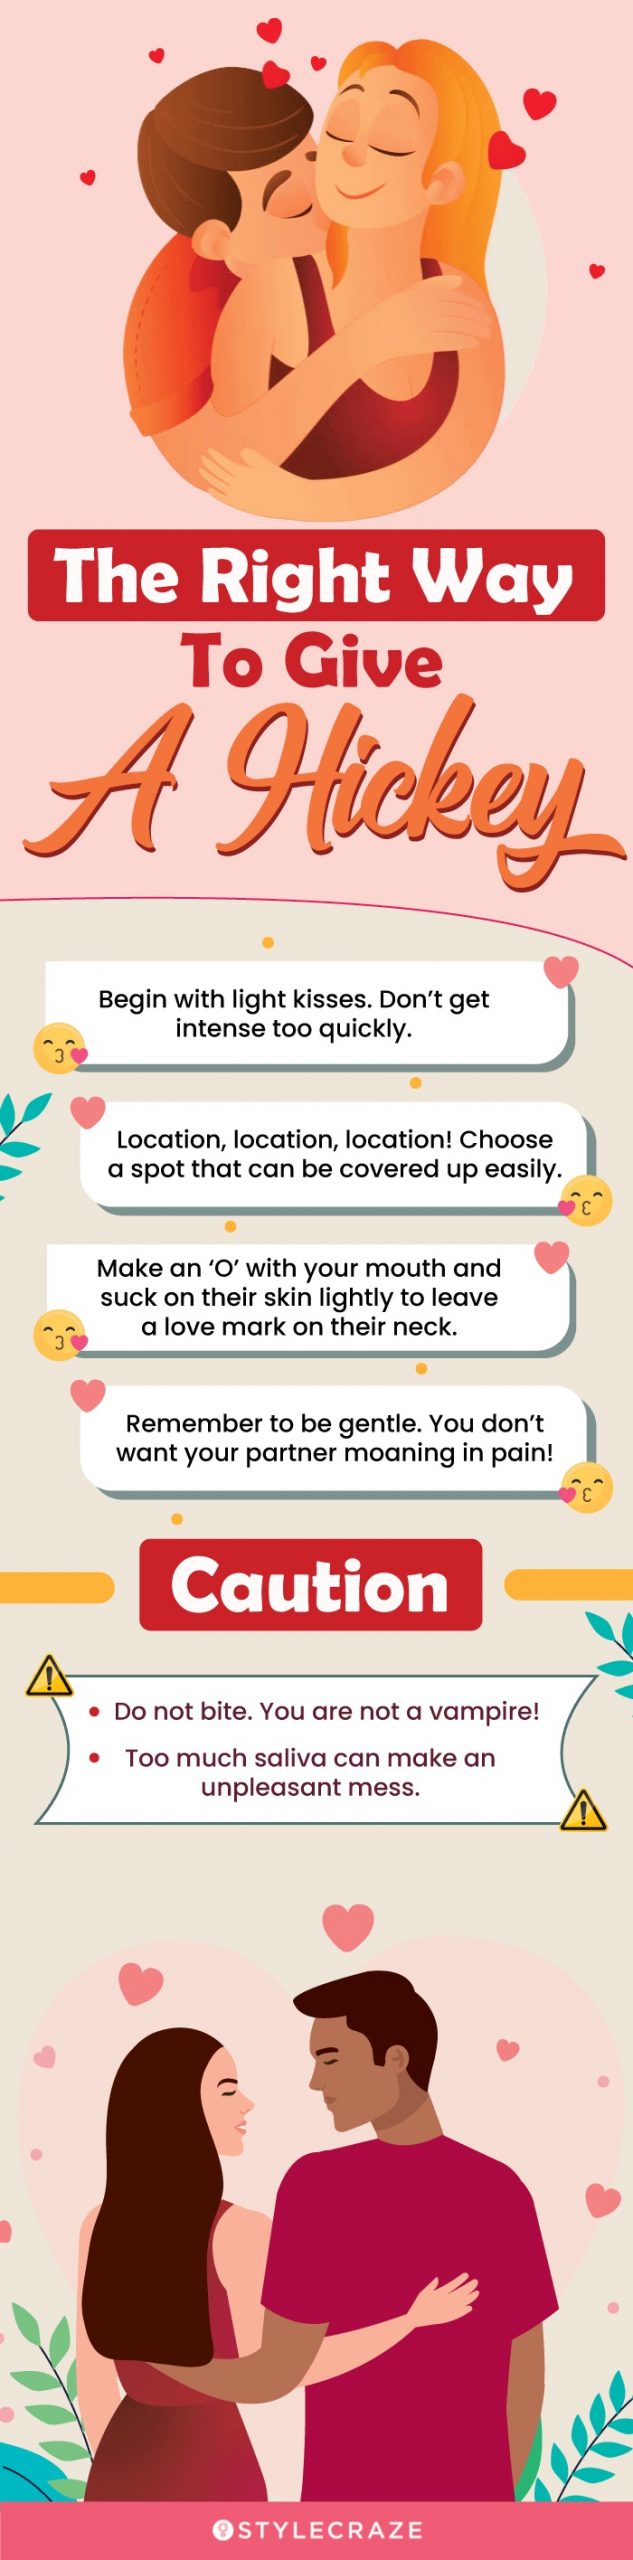 a right way to give a hickey (infographic)